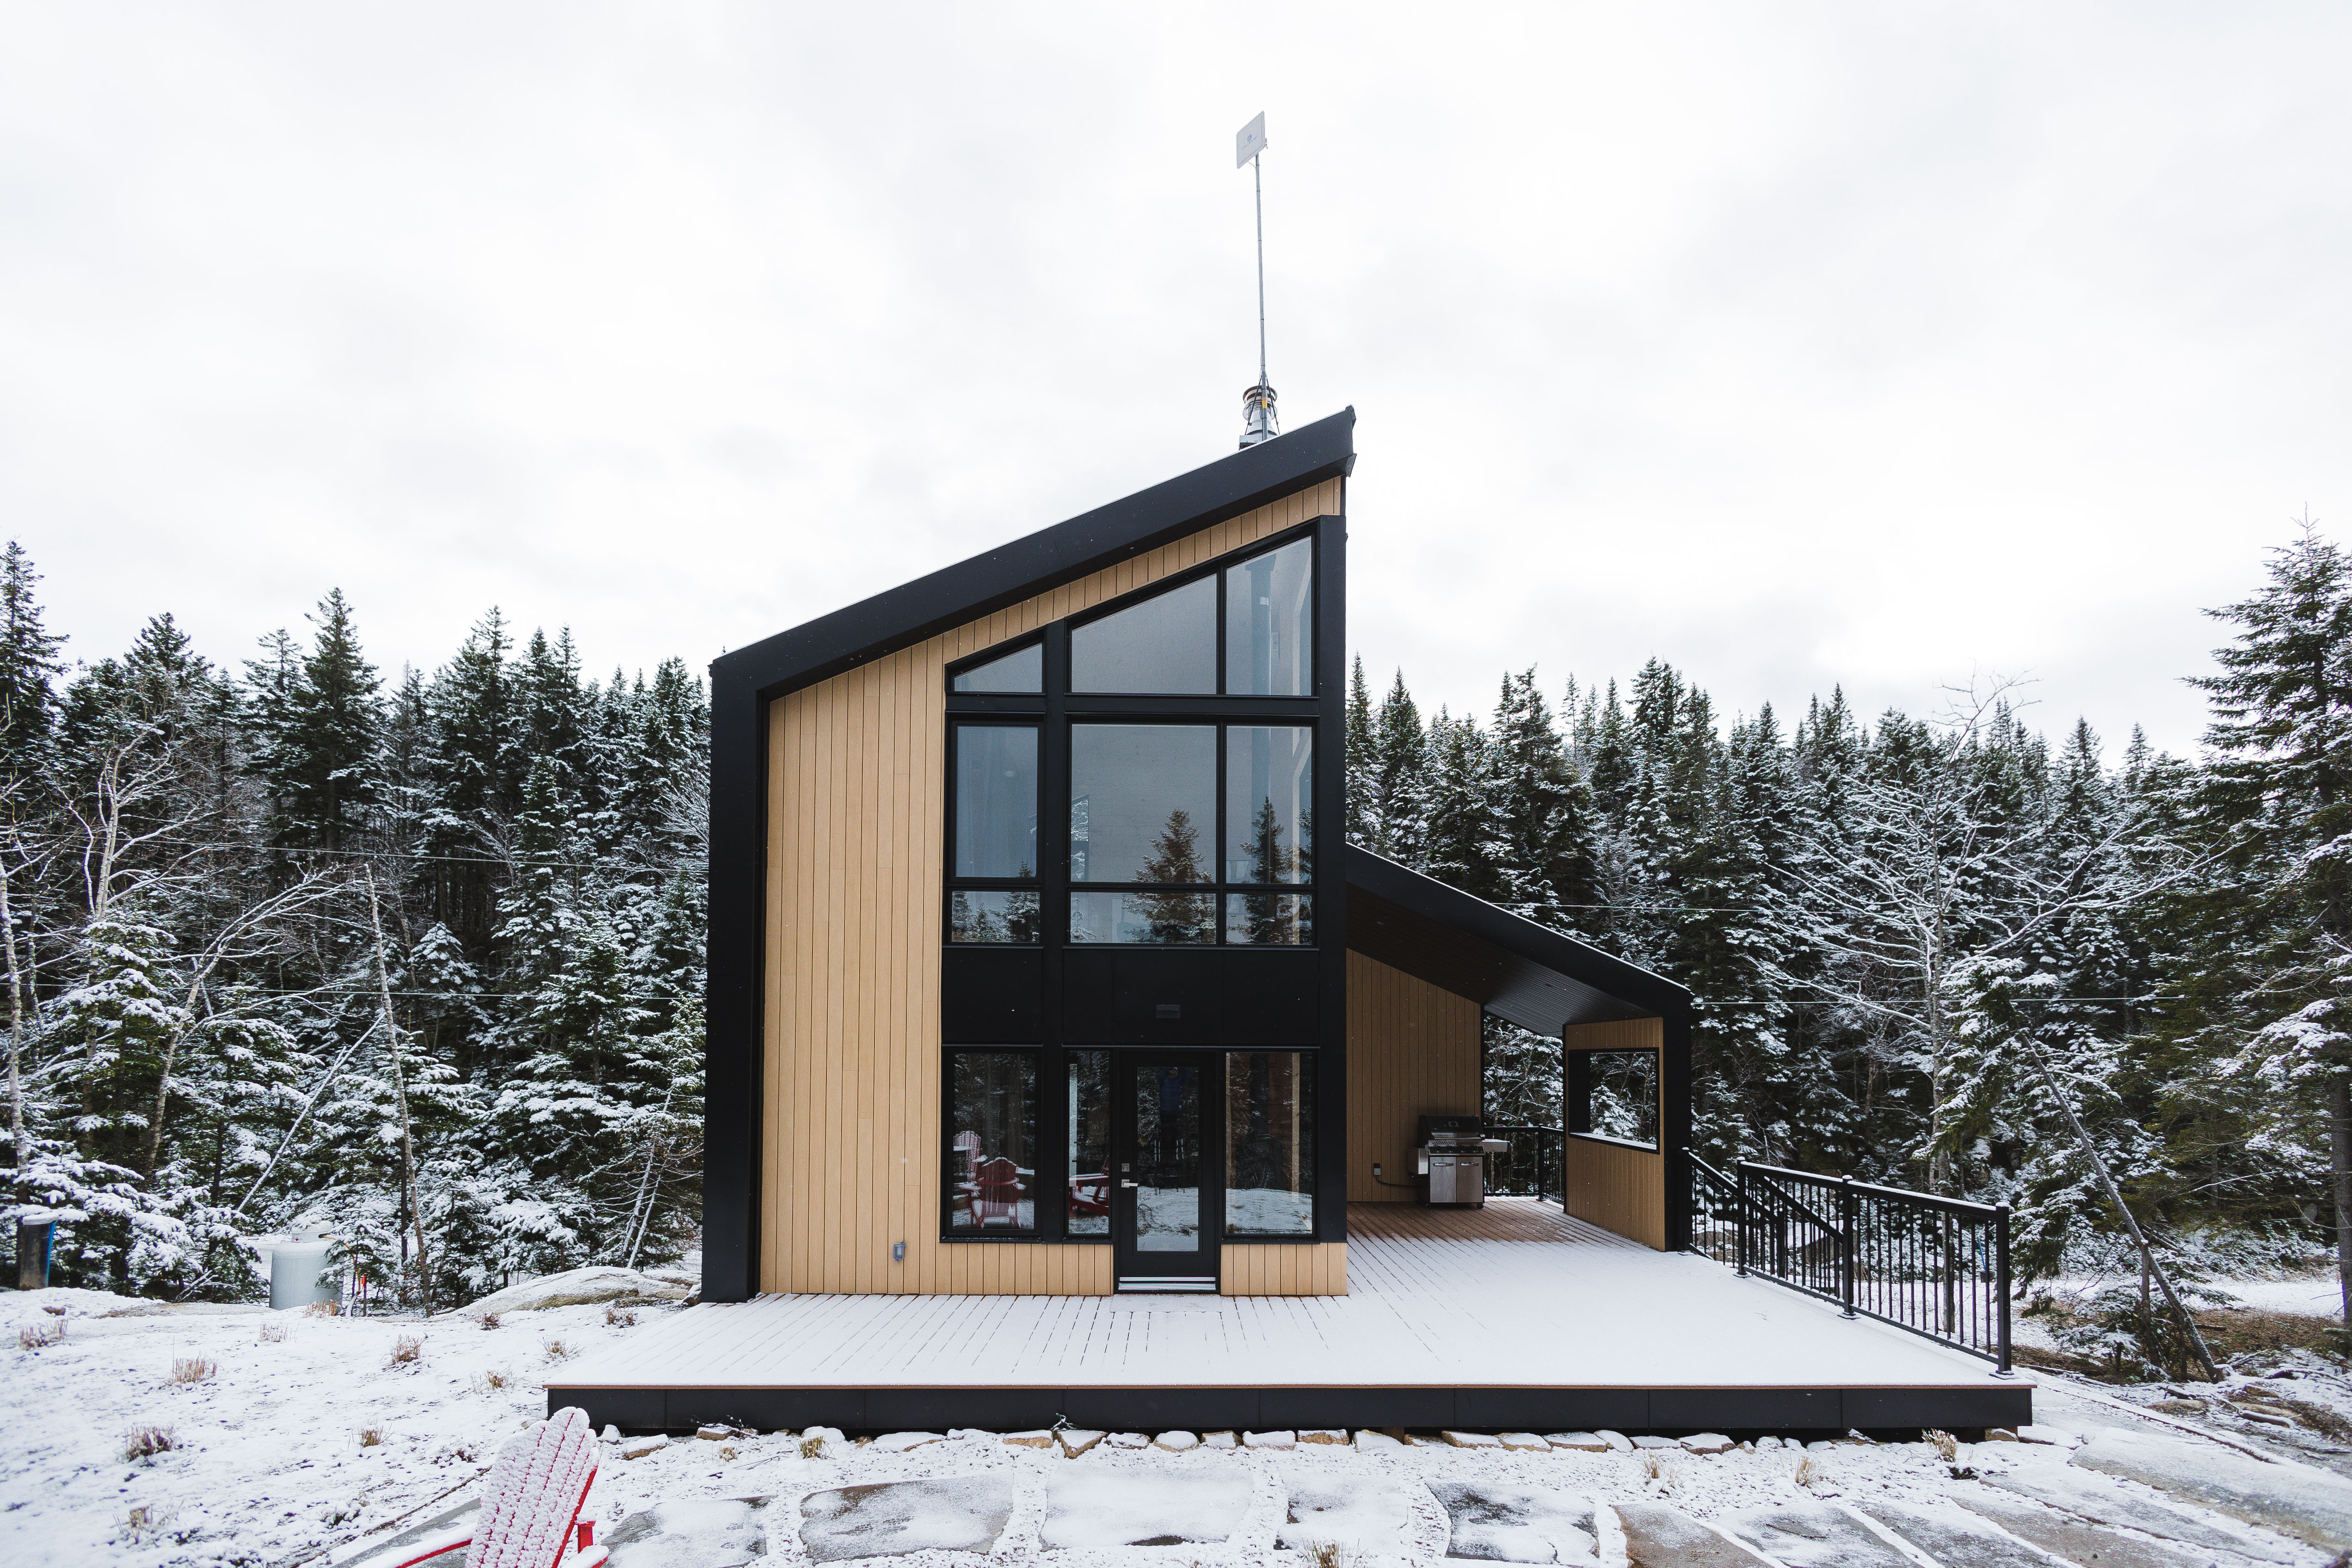 A tiny home with a deck surrounded by forestry in snow.